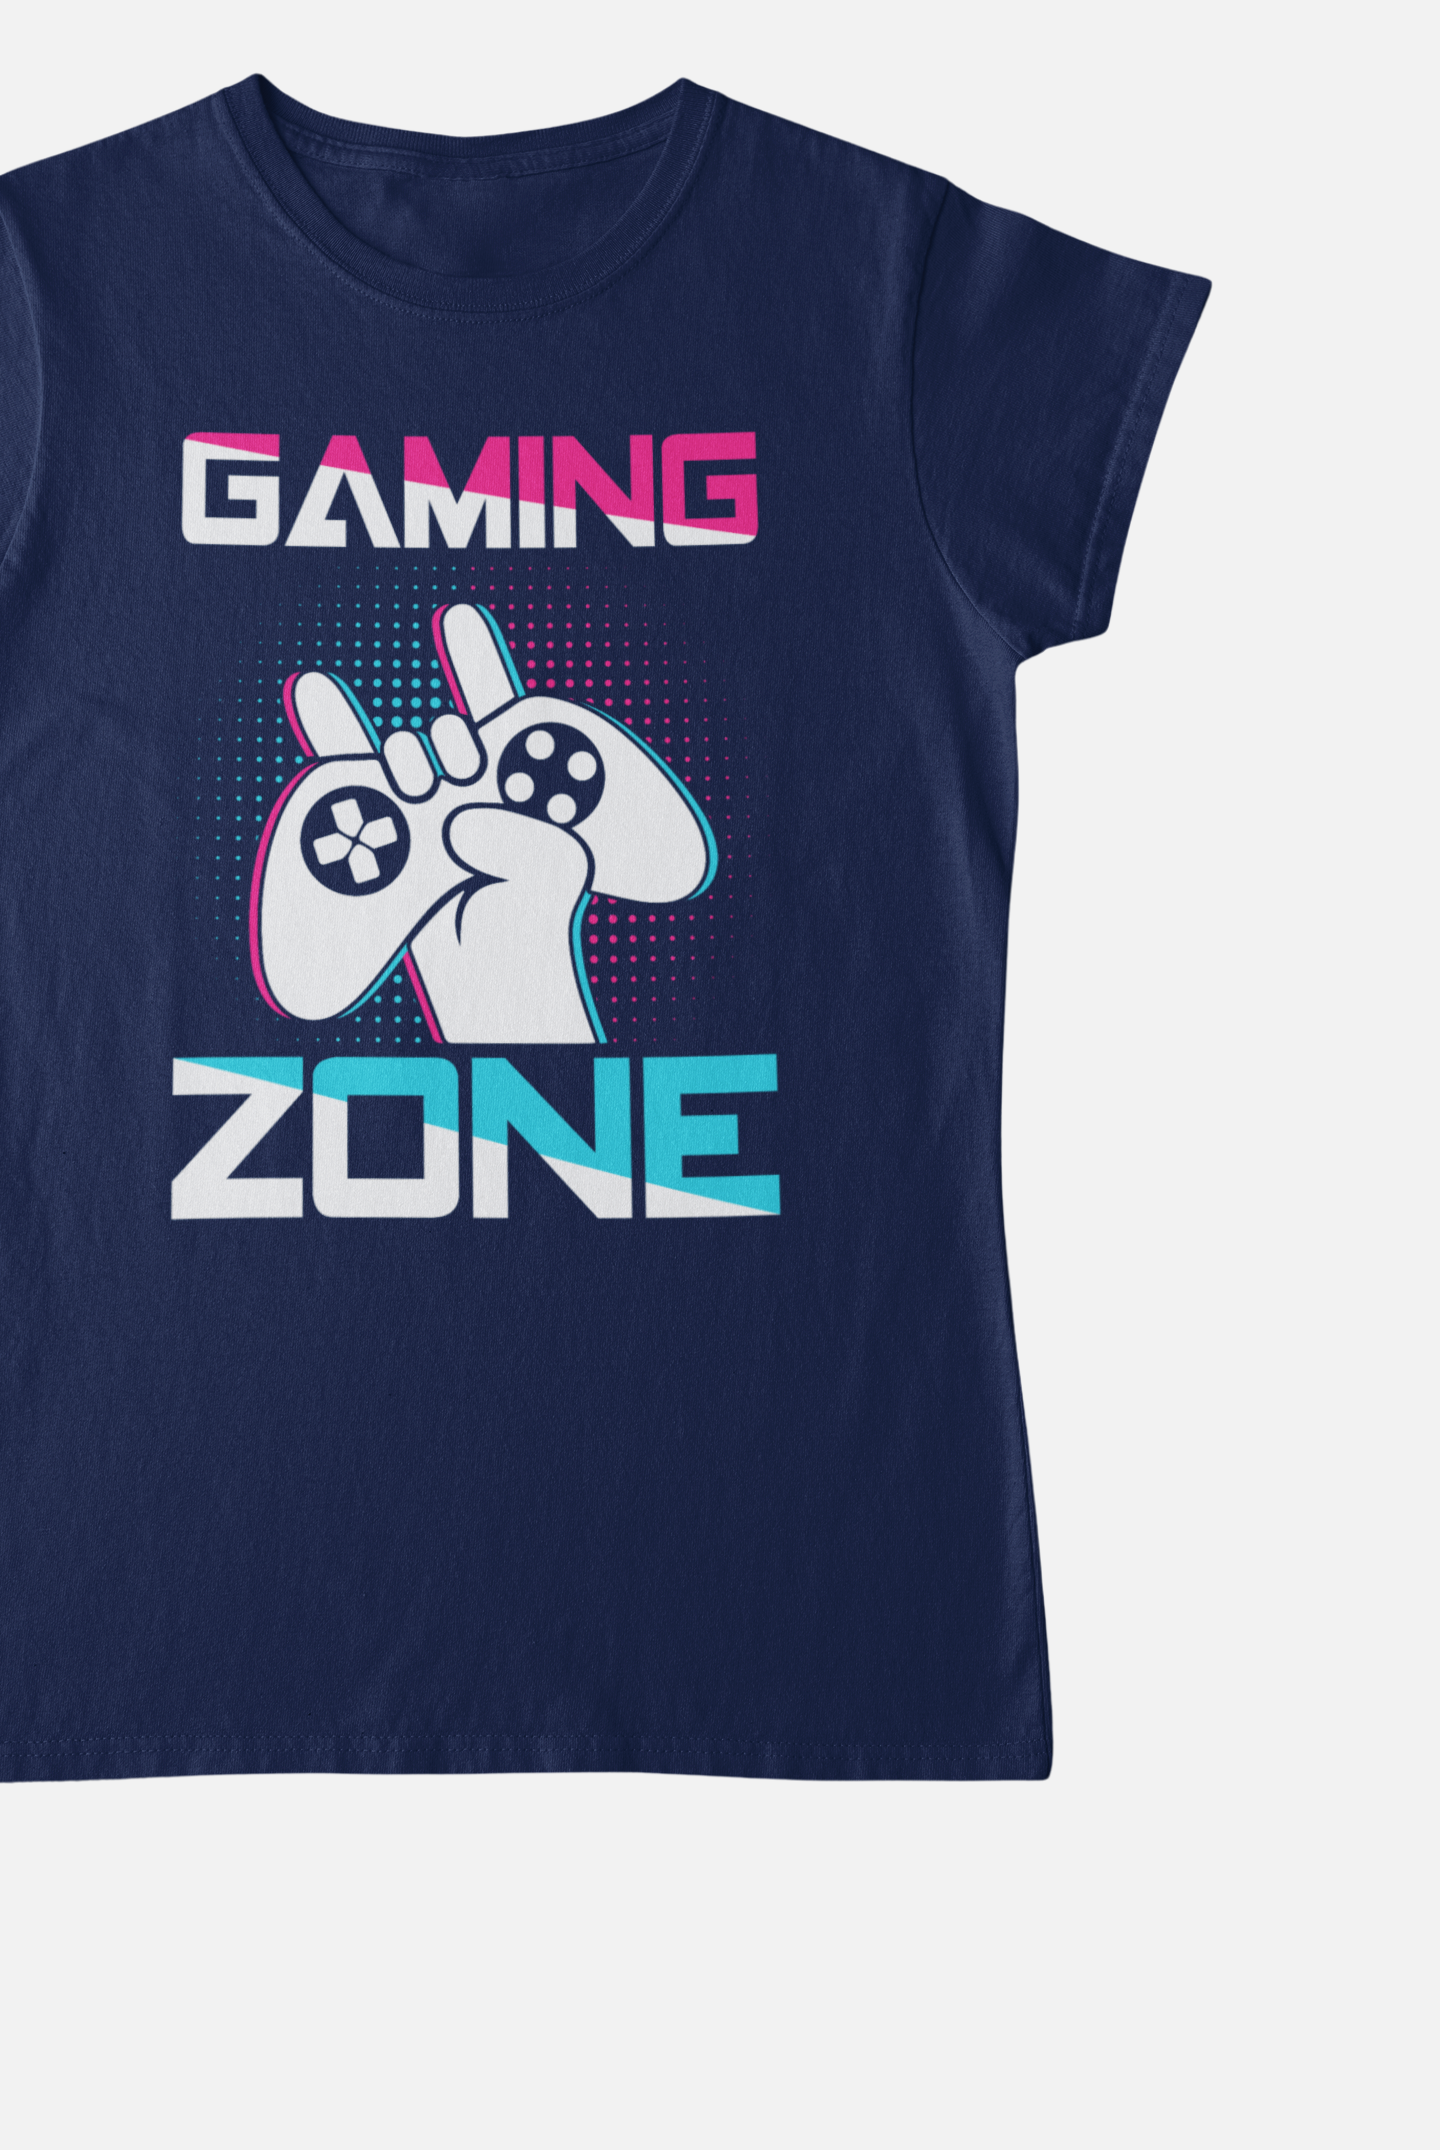 Gaming Zone Navy Blue Round Neck T-Shirt for Women